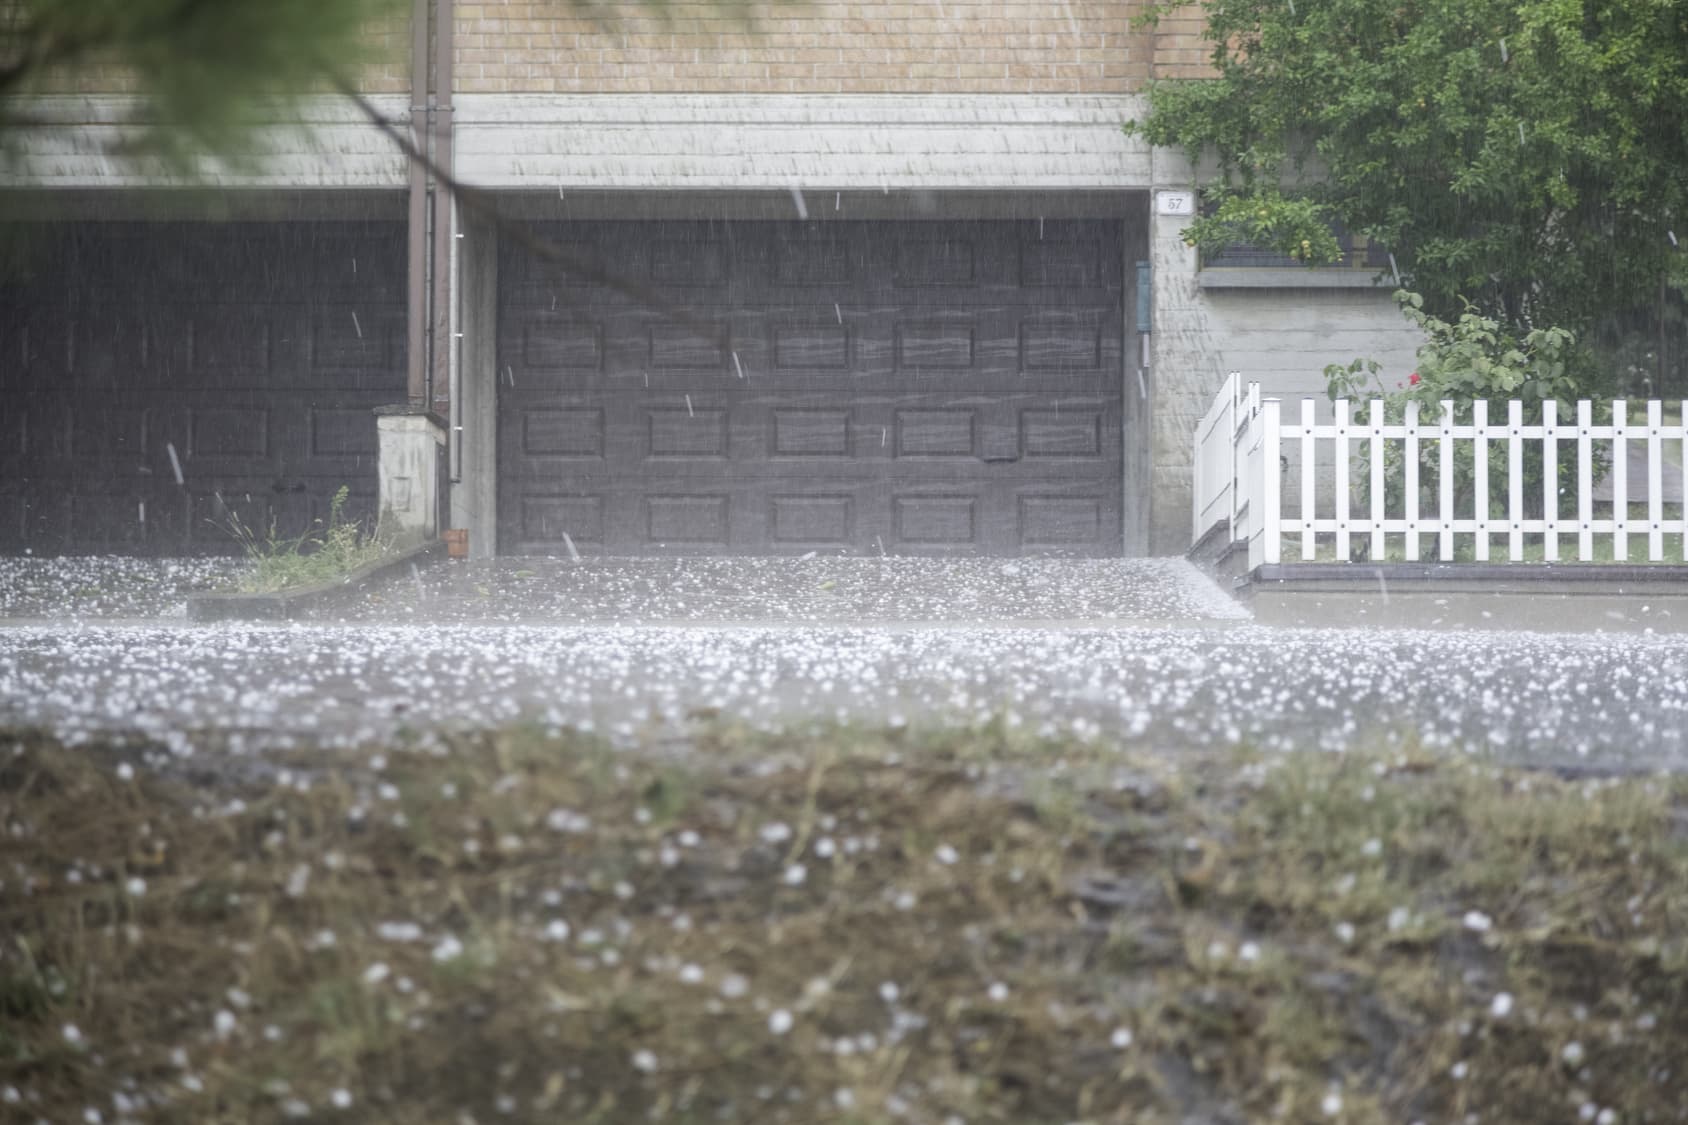 Hail falling from the sky in front of a house